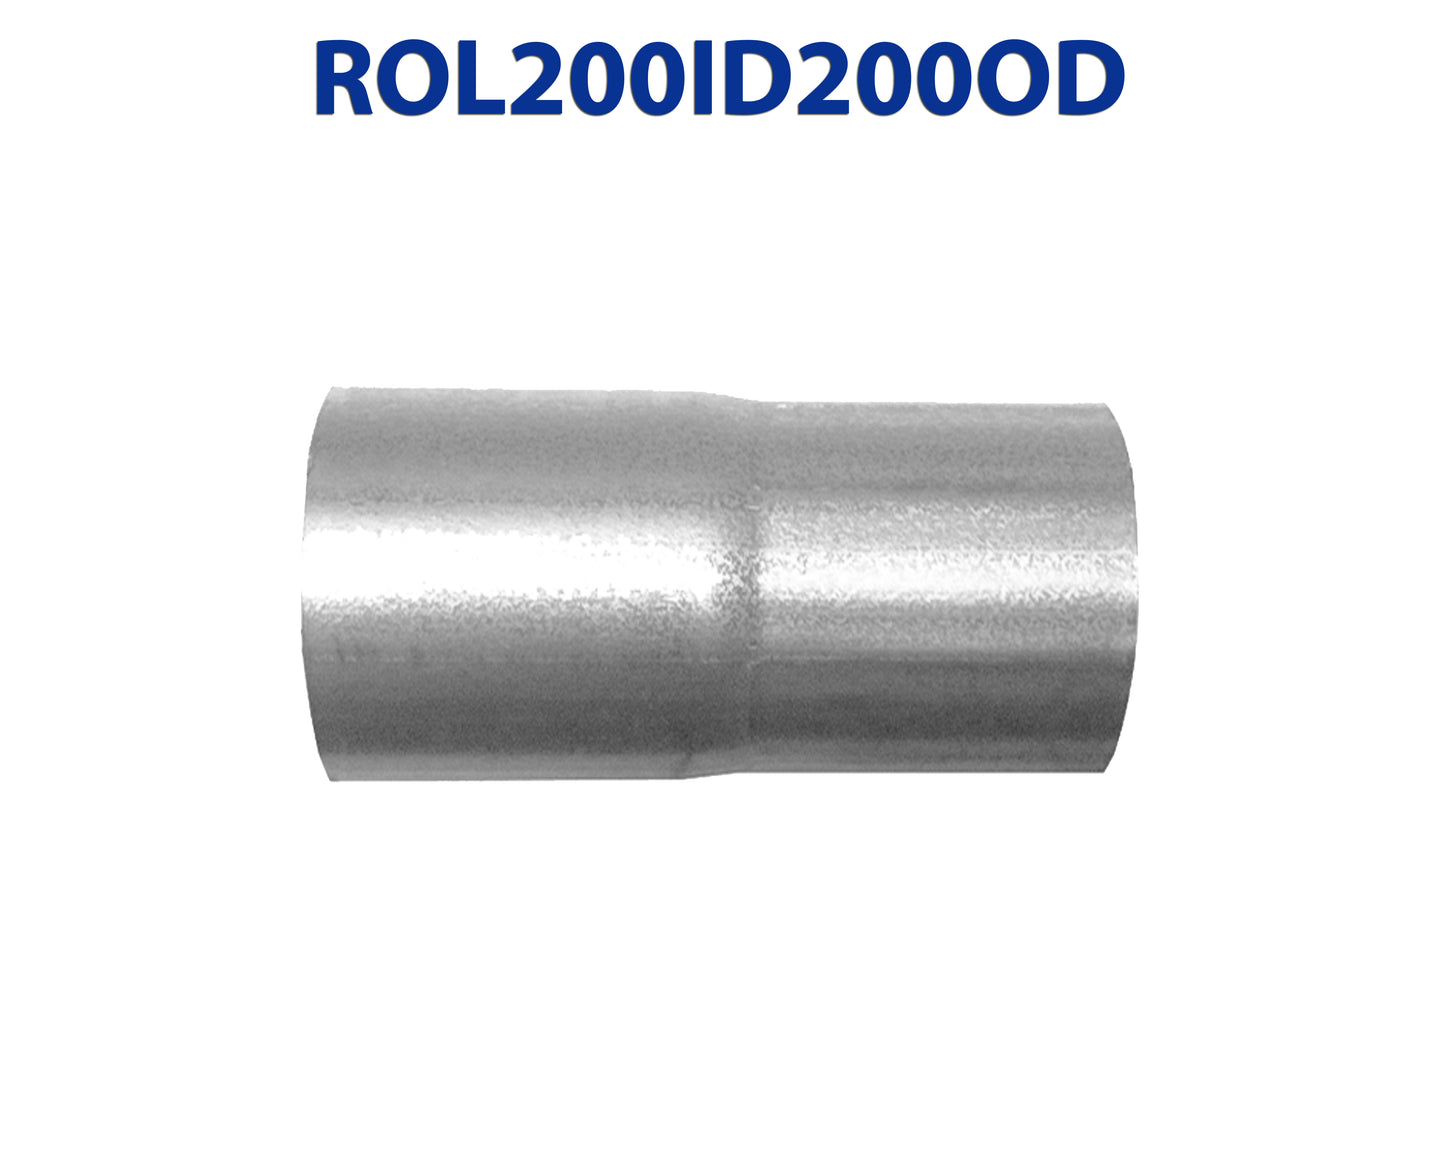 ROL200ID200OD 548501 2” ID to 2” OD Universal Exhaust Pipe to Component Coupling Connector